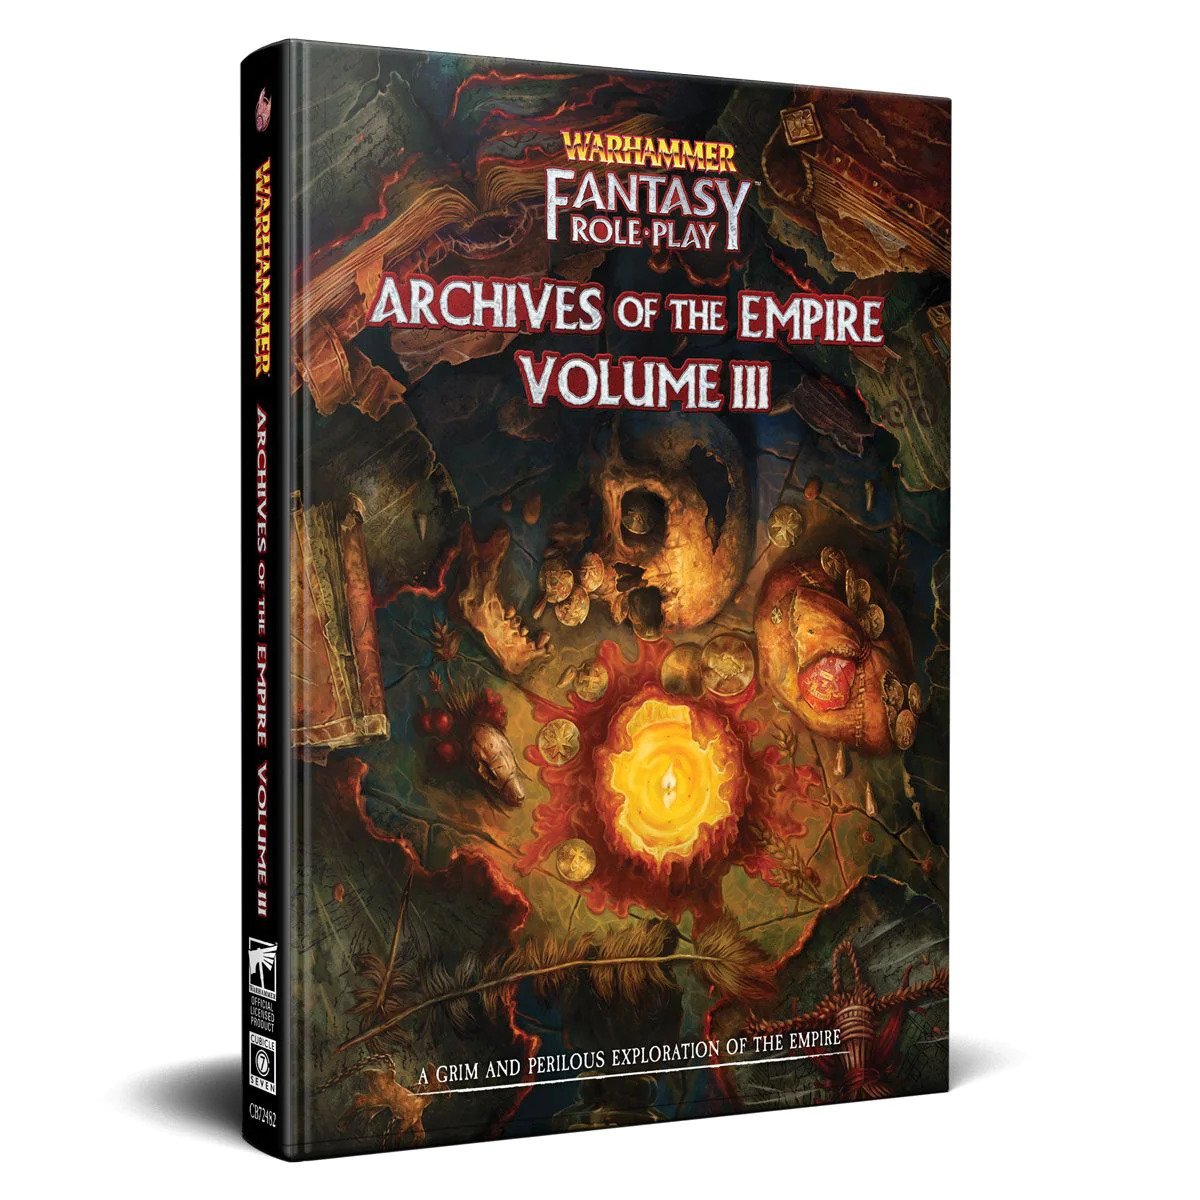 Warhammer Fantasy Roleplay - Archives of the Empire Volume 3